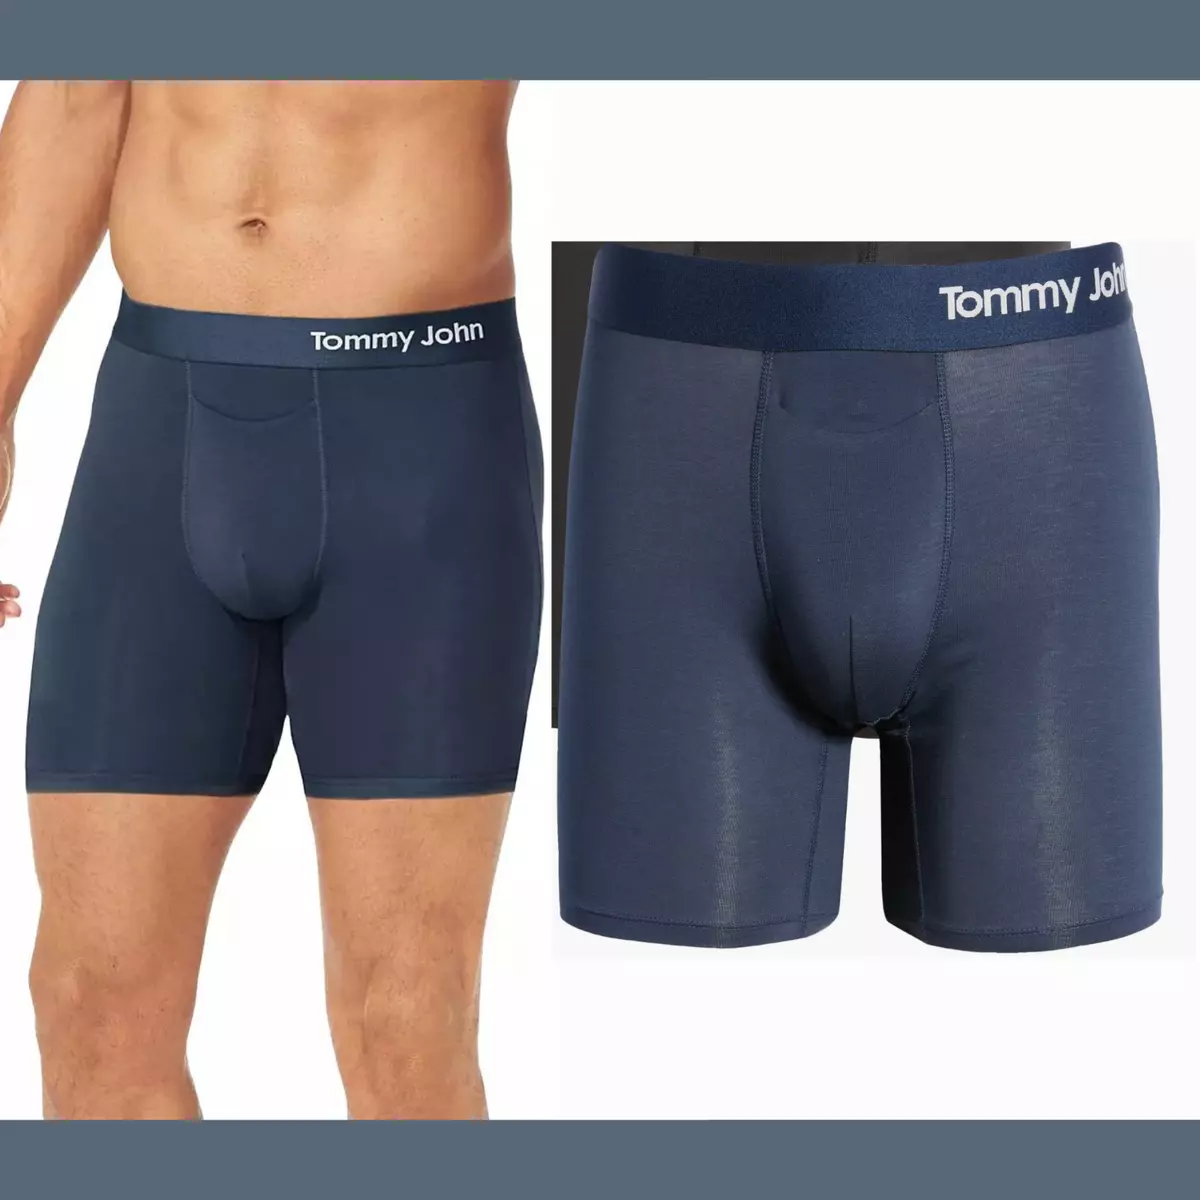 NWT $32 TOMMY JOHN [ Medium ] Cool Cotton 6-Inch Boxer Briefs in